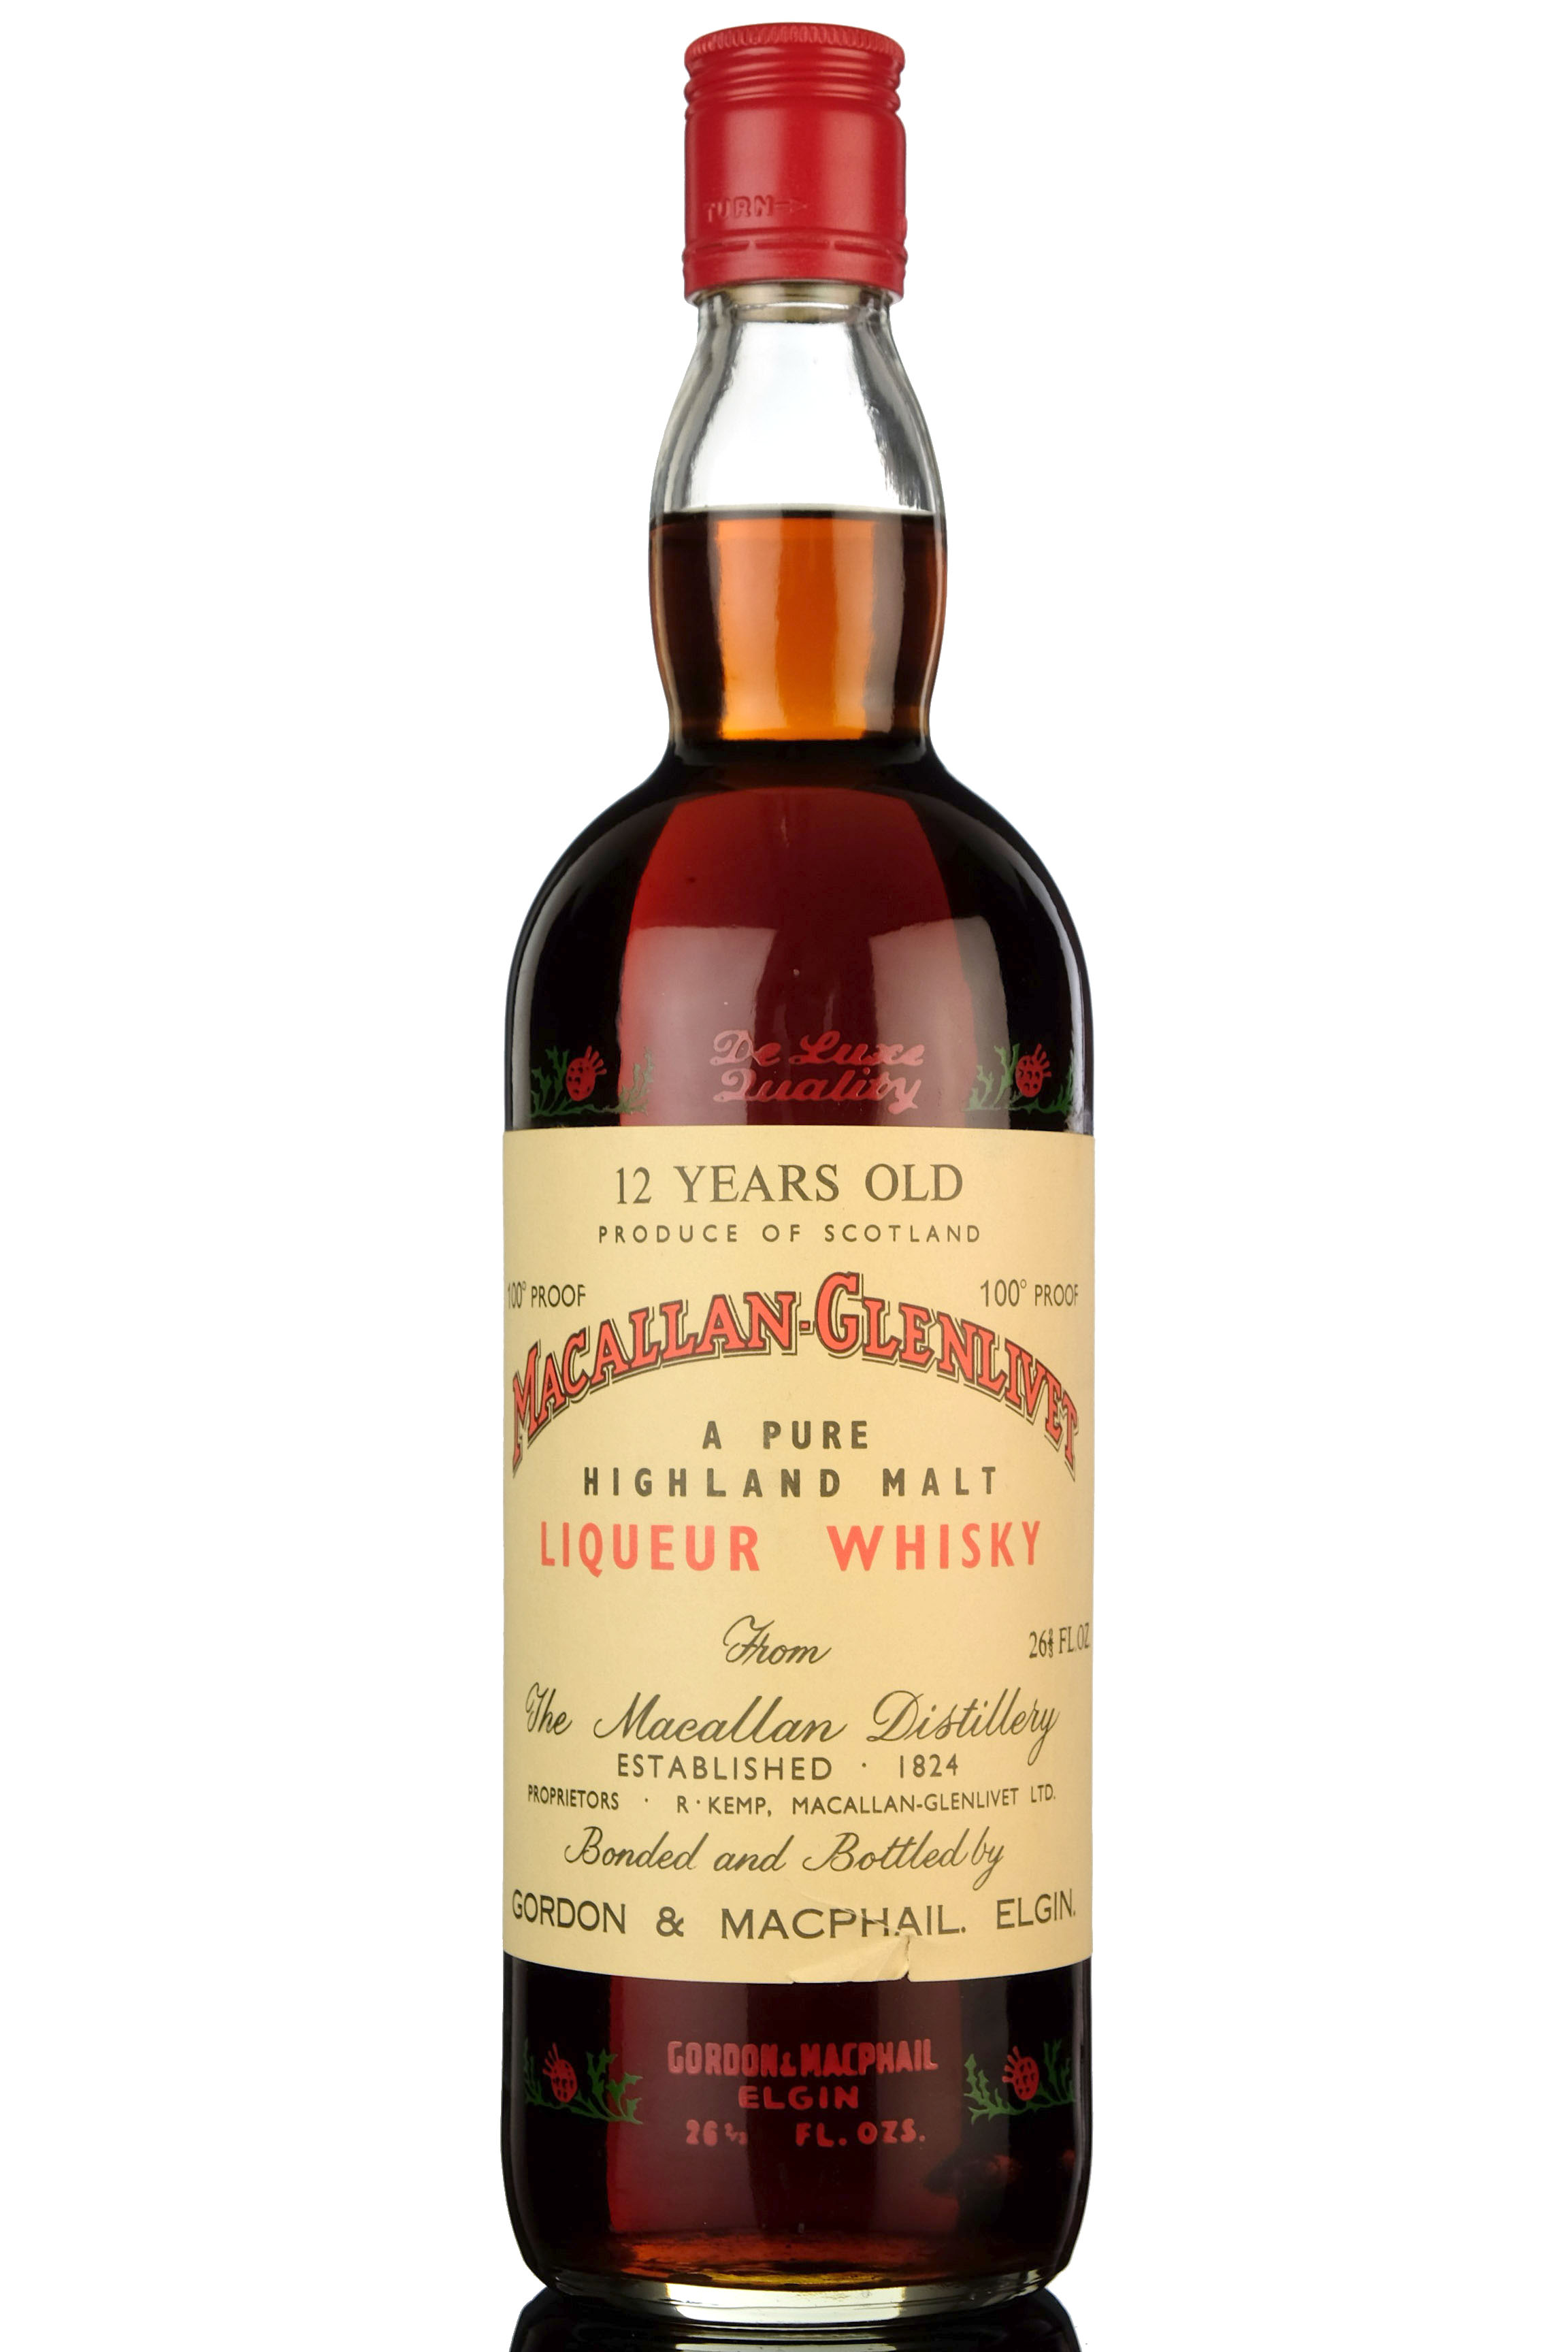 Macallan 12 Year Old - Liqueur Whisky - 100 Proof - Rotation 1971